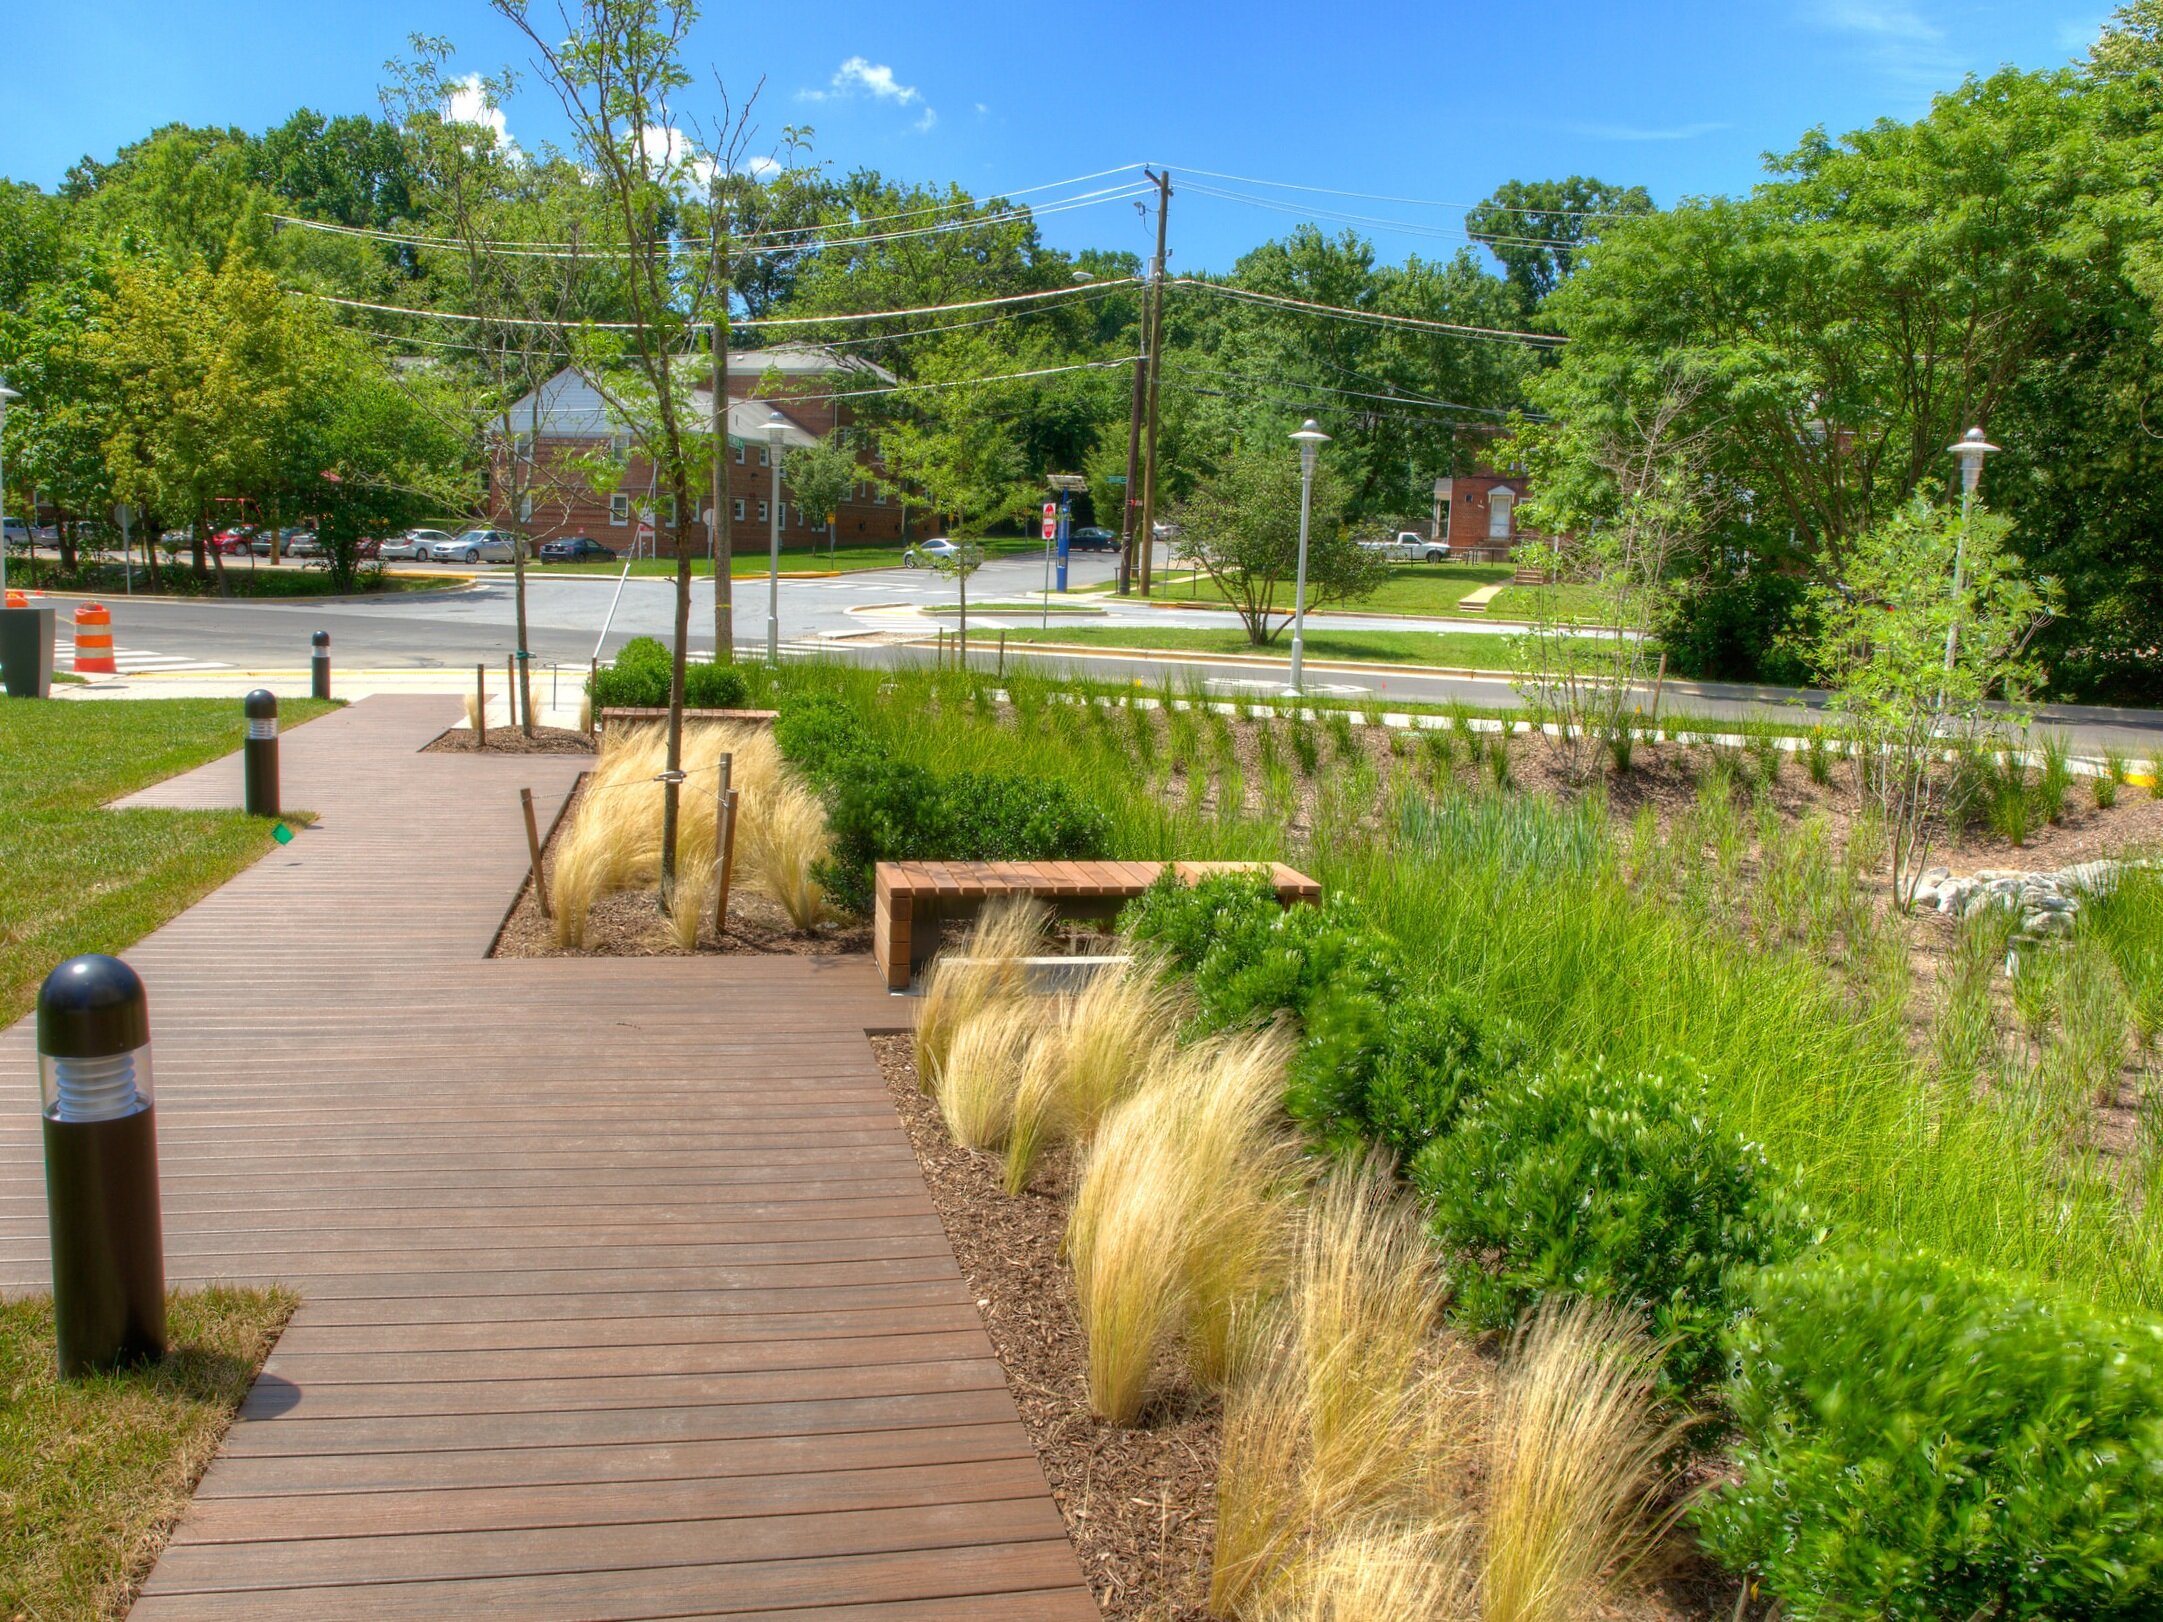   Lush plantings surround the walkways and serve as stormwater management treatment areas.  